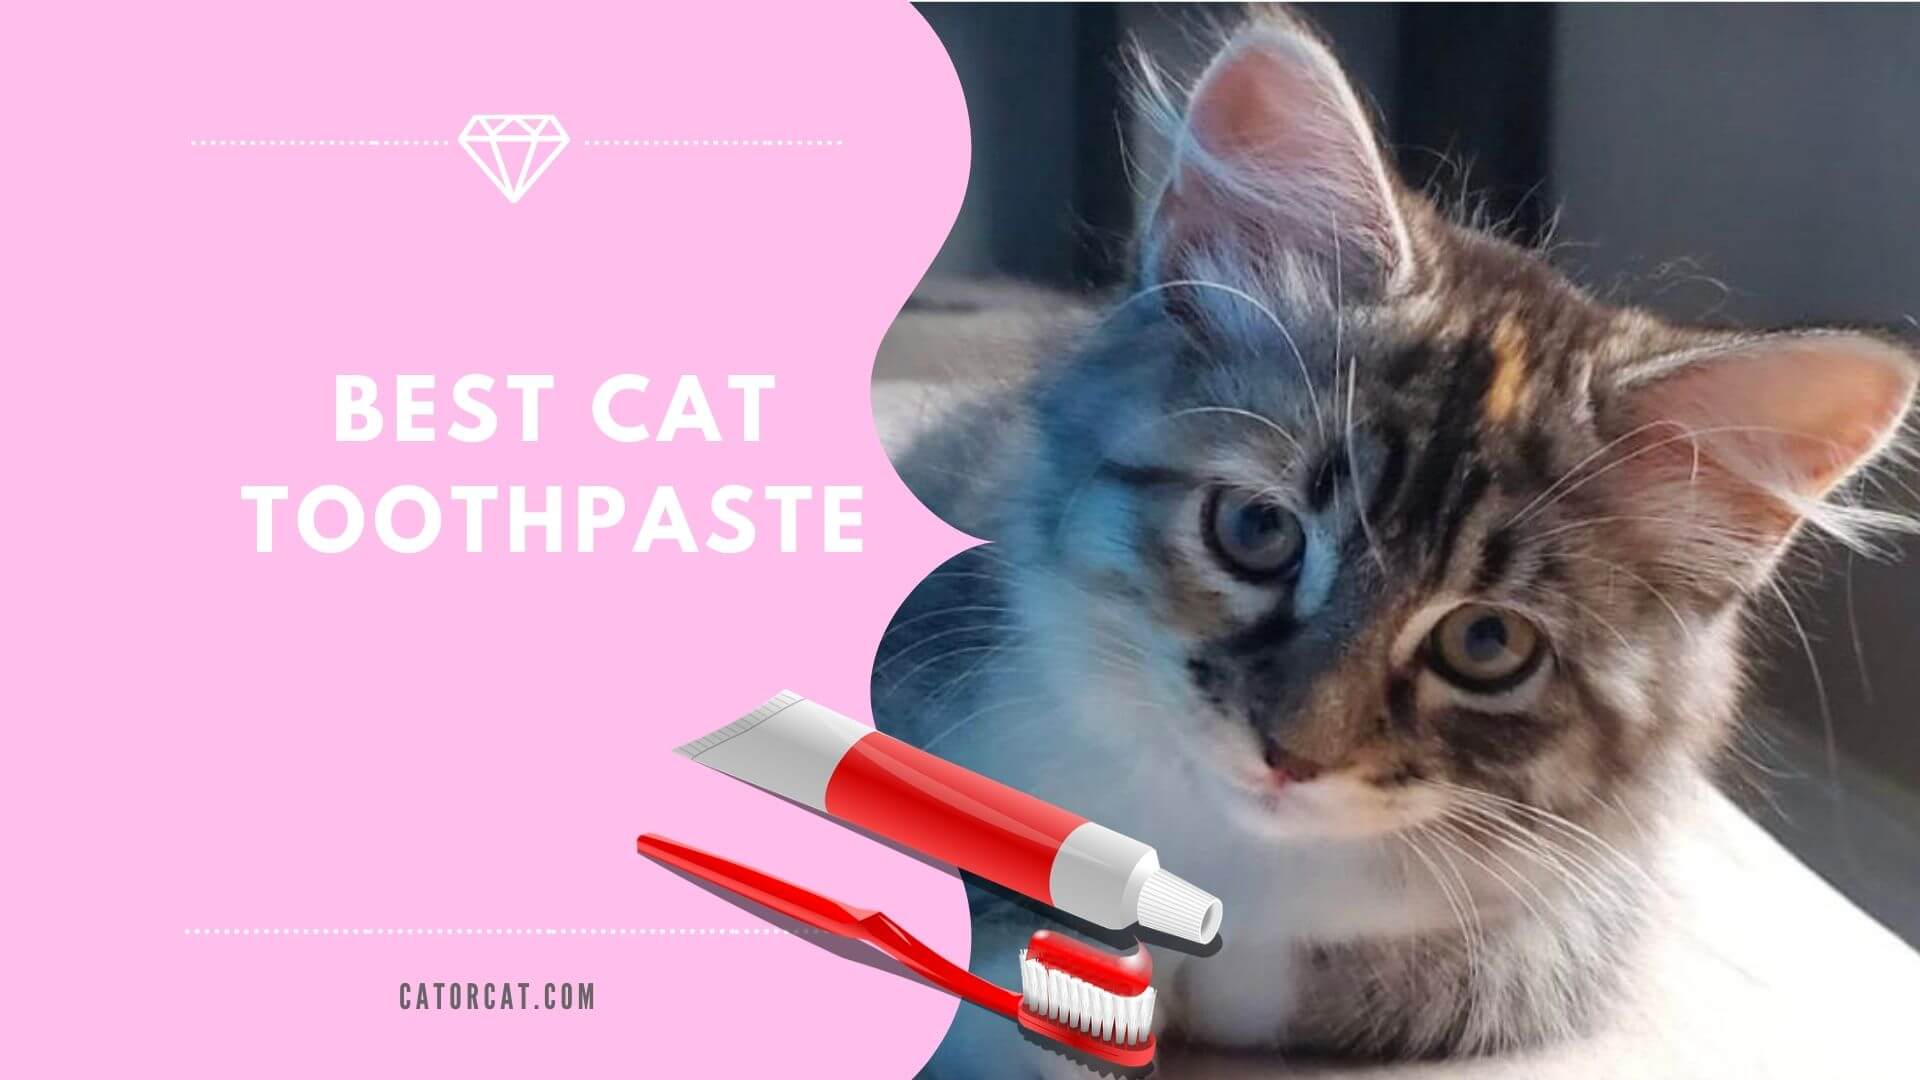 The Best Cat Toothpaste in 2021 5 Most Effective Reviews & Guide